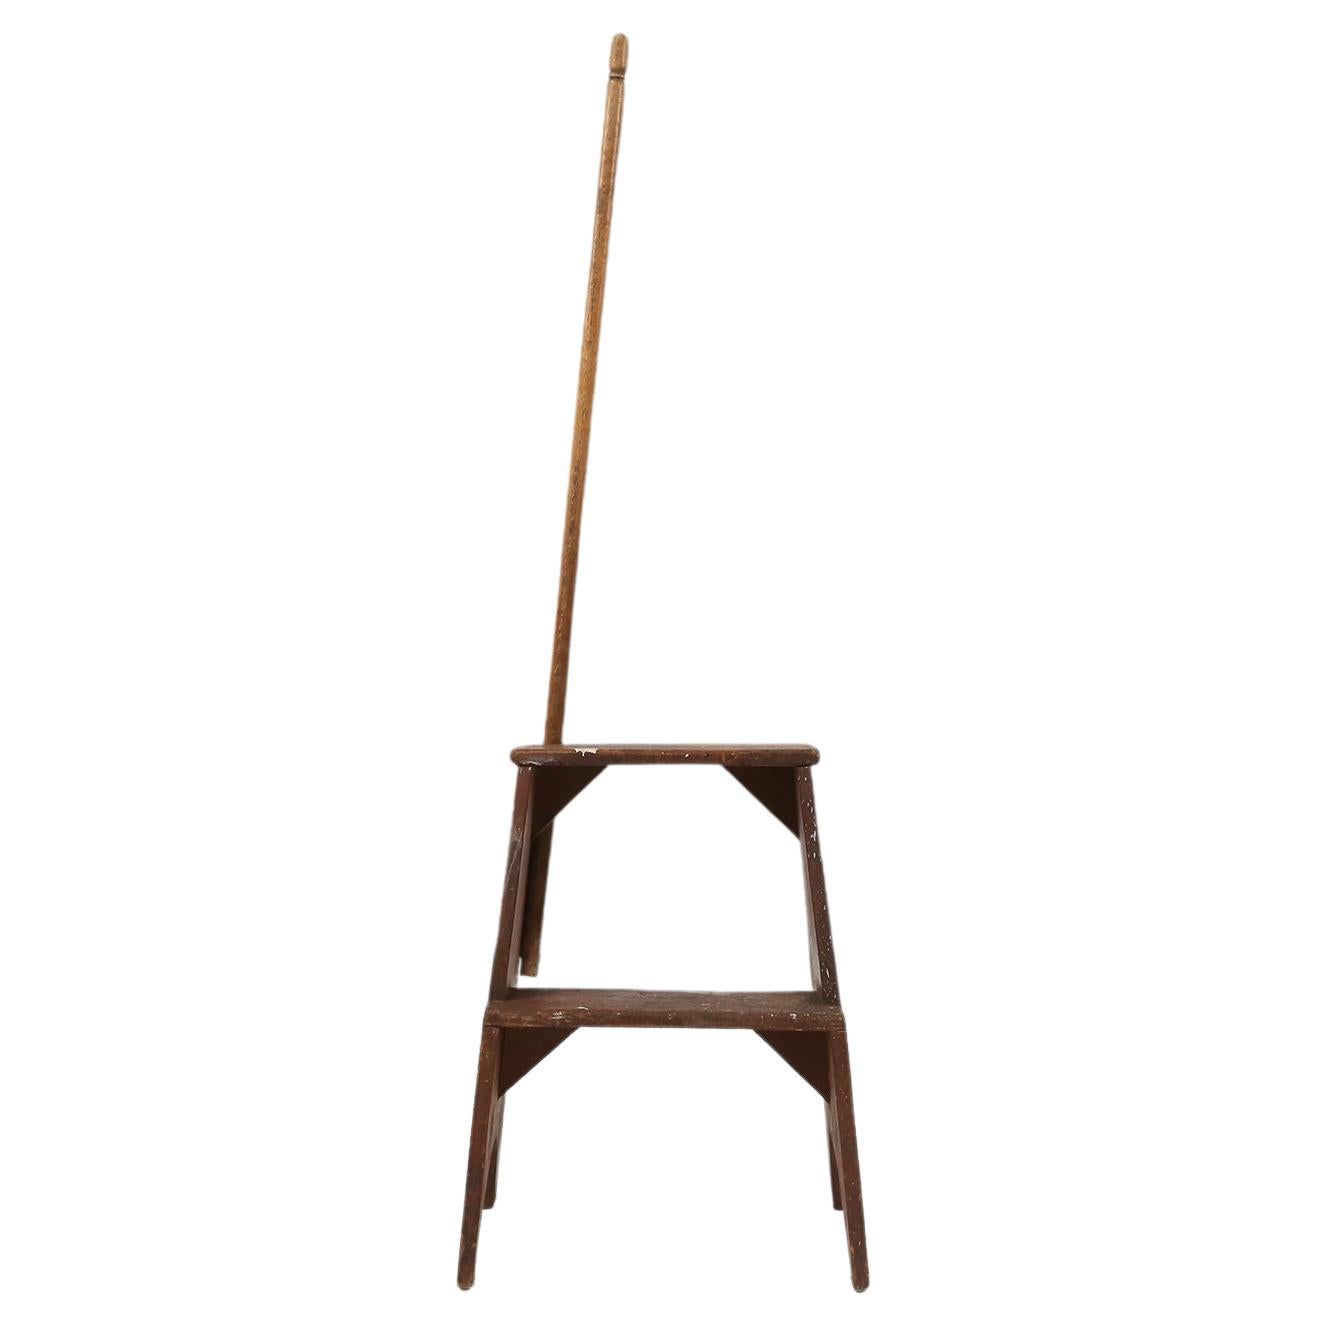 This beautiful vintage industrial wooden stepladder with a stick for support is a perfect addition to any interior. With its French design and wooden construction, it exudes a classic charm that fits effortlessly into any space. Whether you want to